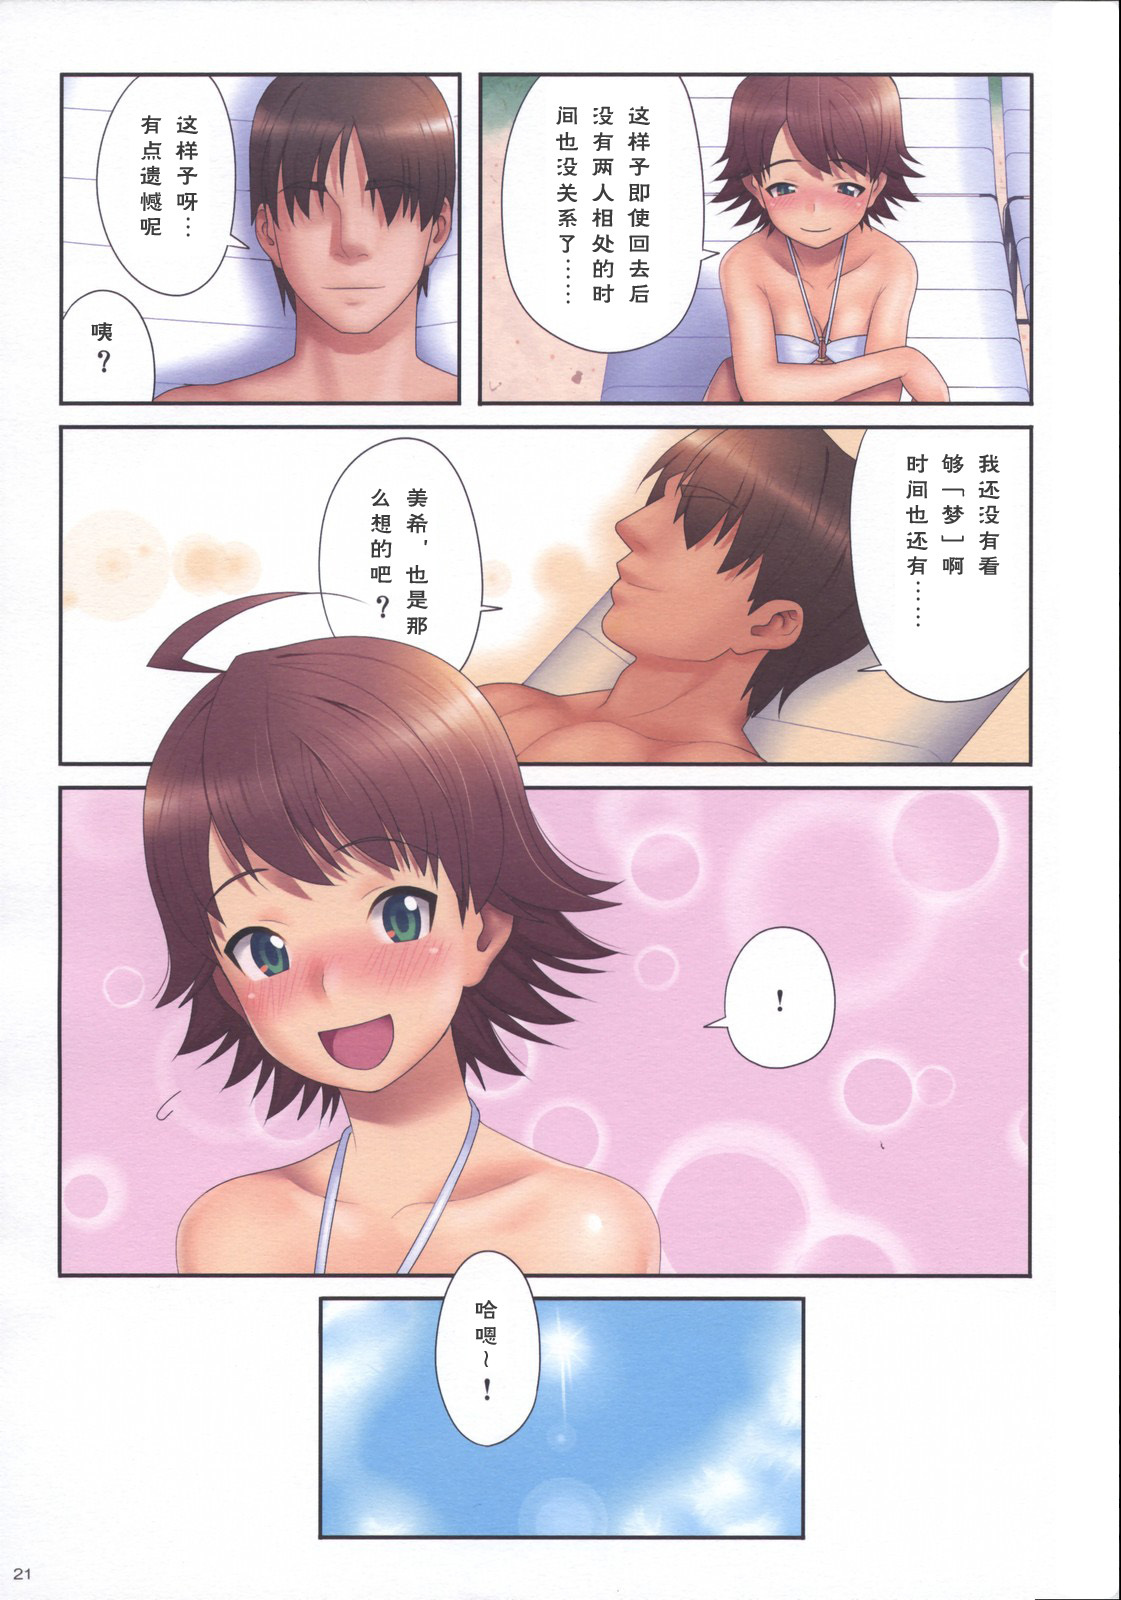 (CT12) [TNC. (Lunch)] Fourteen Plus (THE iDOLM@STER) [Chinese] [真实de汉化组] page 20 full